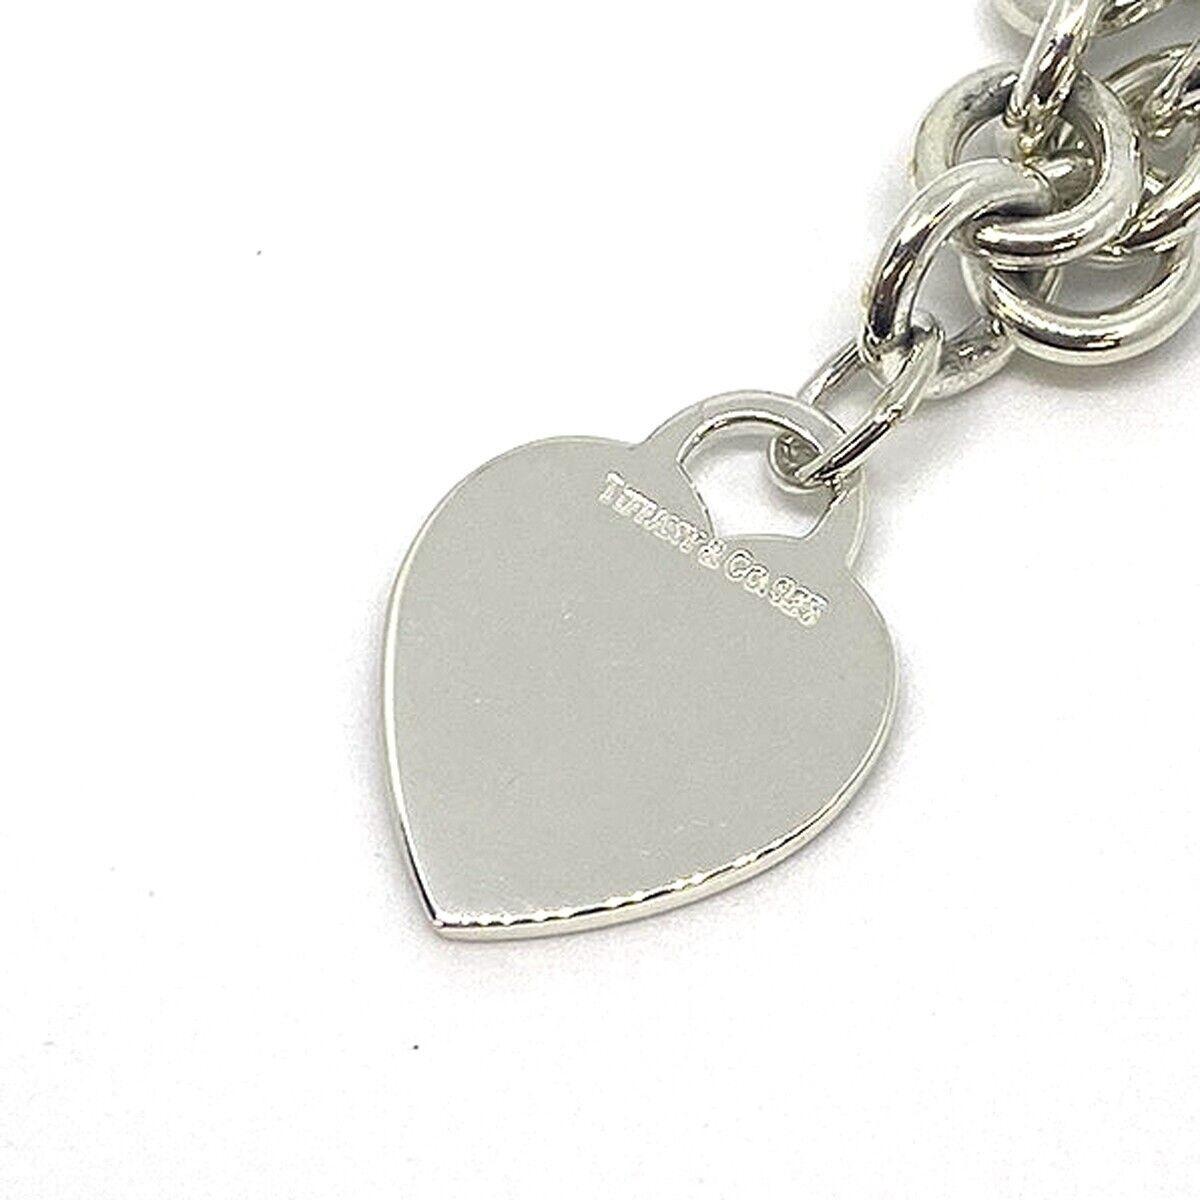 Brand Tiffany & co
Condition Pre-owned
Gender Women
Style necklace
Material sterling silver
Metal purity 925
Chain 16''
Heart dimension 26.5 x 20.5
Necklace 69gr 
Comes with Tiffany original pouch
